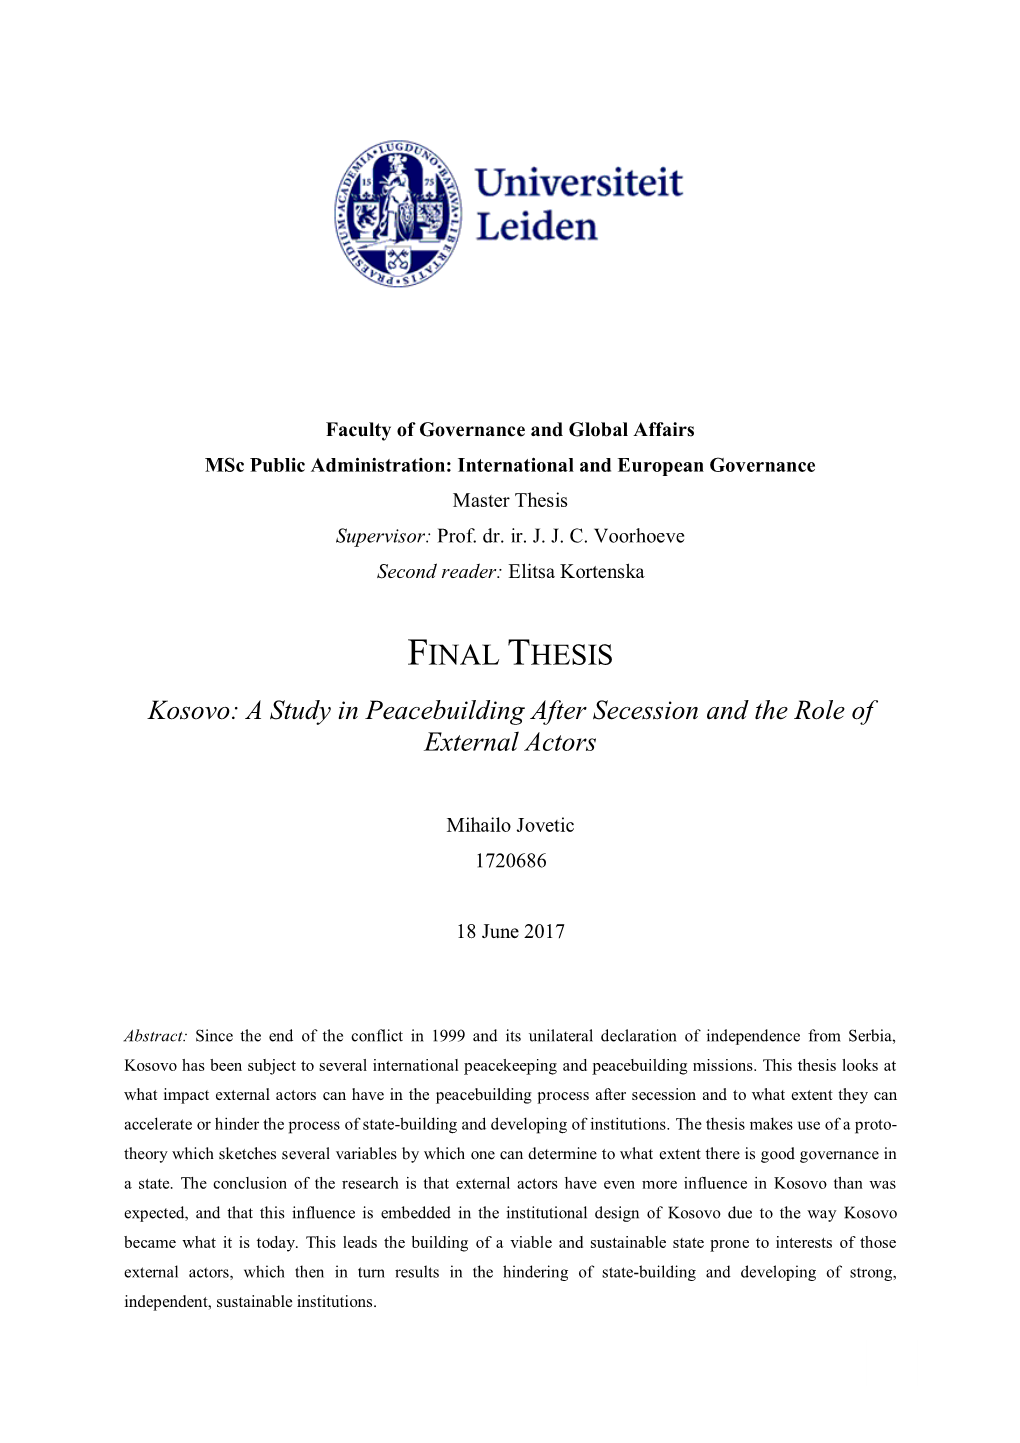 FINAL THESIS Kosovo: a Study in Peacebuilding After Secession and the Role of External Actors